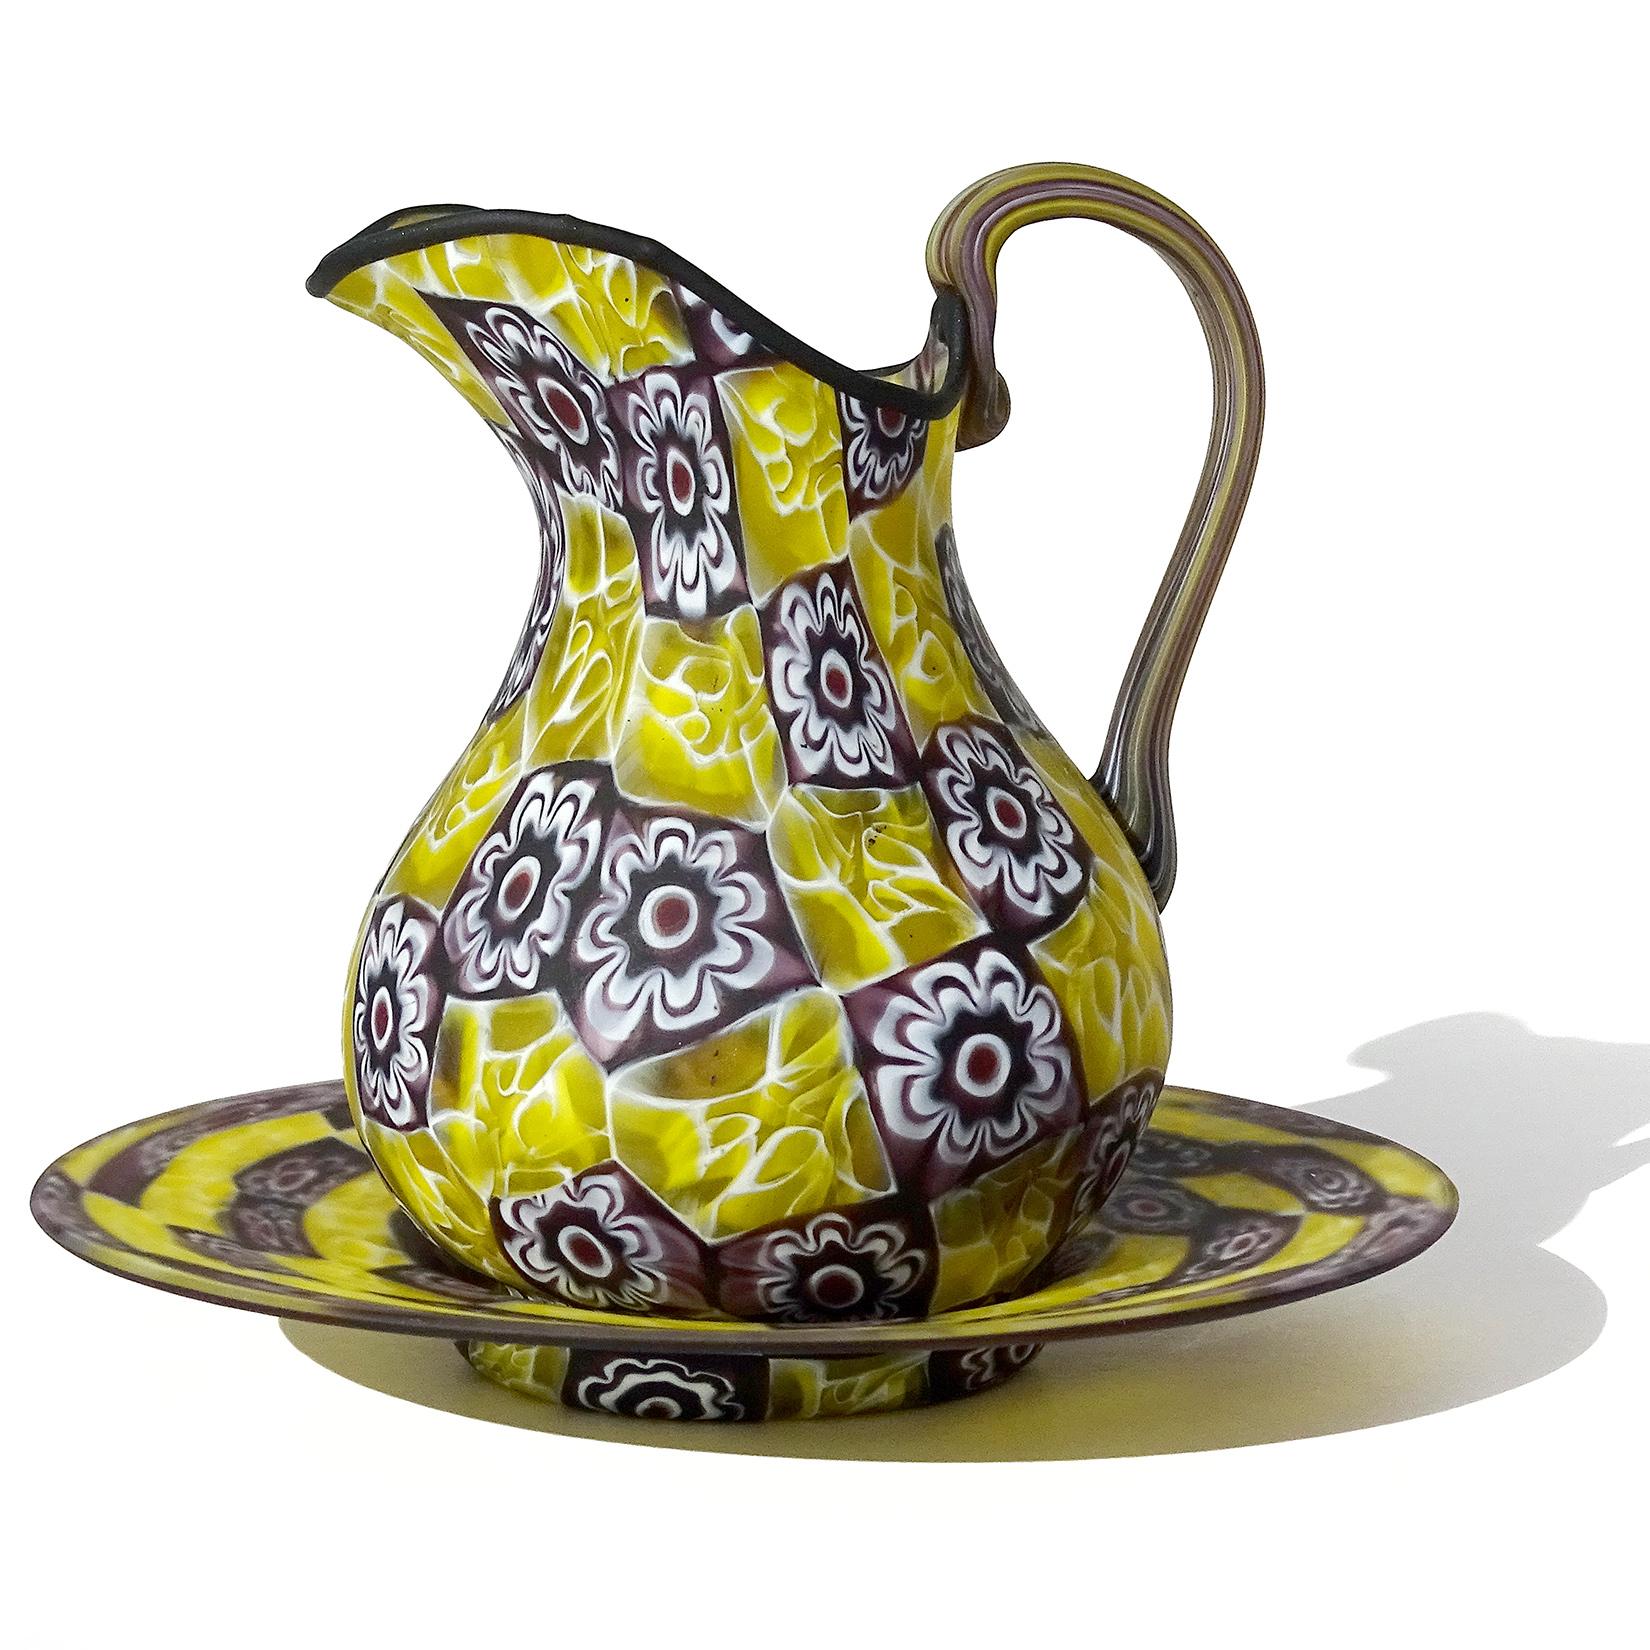 Beautiful antique Murano hand blown large Millefiori Murrina flower mosaic Italian art glass water pitcher and under plate. Documented to the Fratelli Toso company, circa 1910-1930. The pitcher is made of bright yellow and white honeycomb murrines,